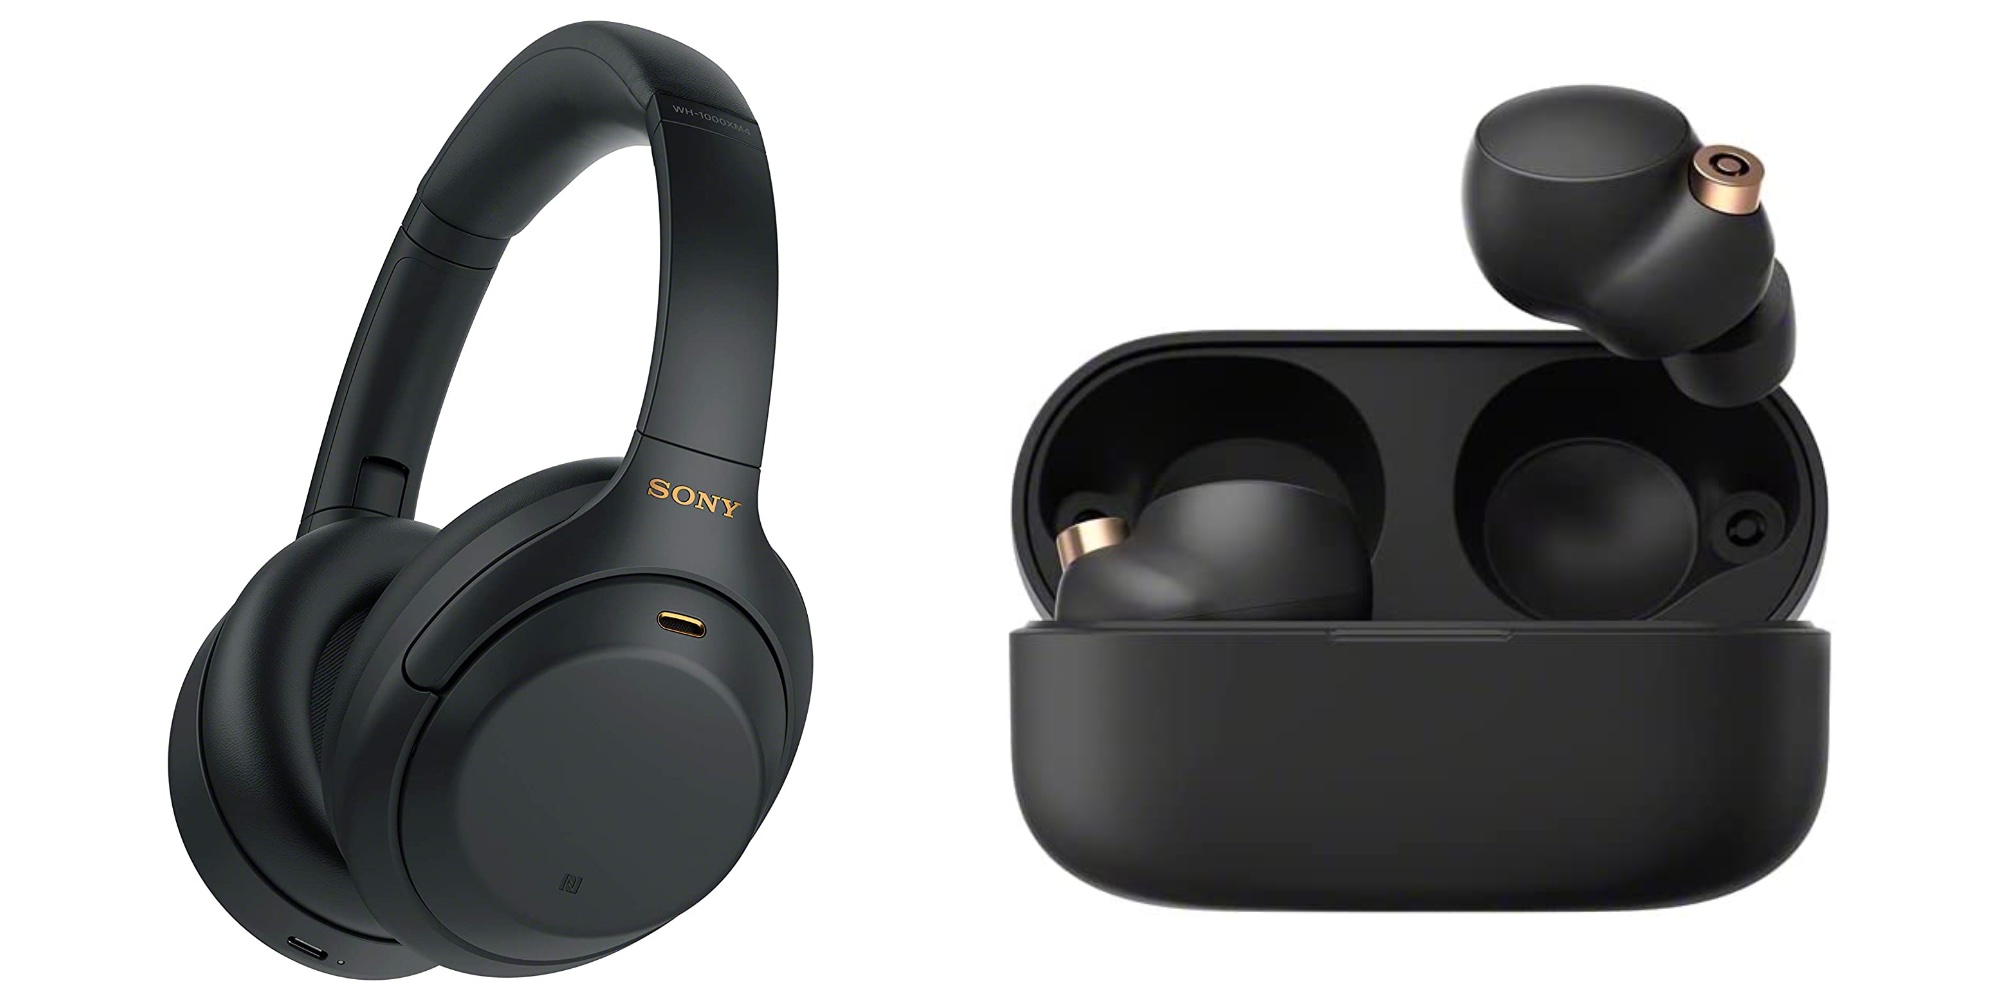 Sony XM4 ANC headphones and true wireless earbuds hit new lows from $198  (Save $80+)